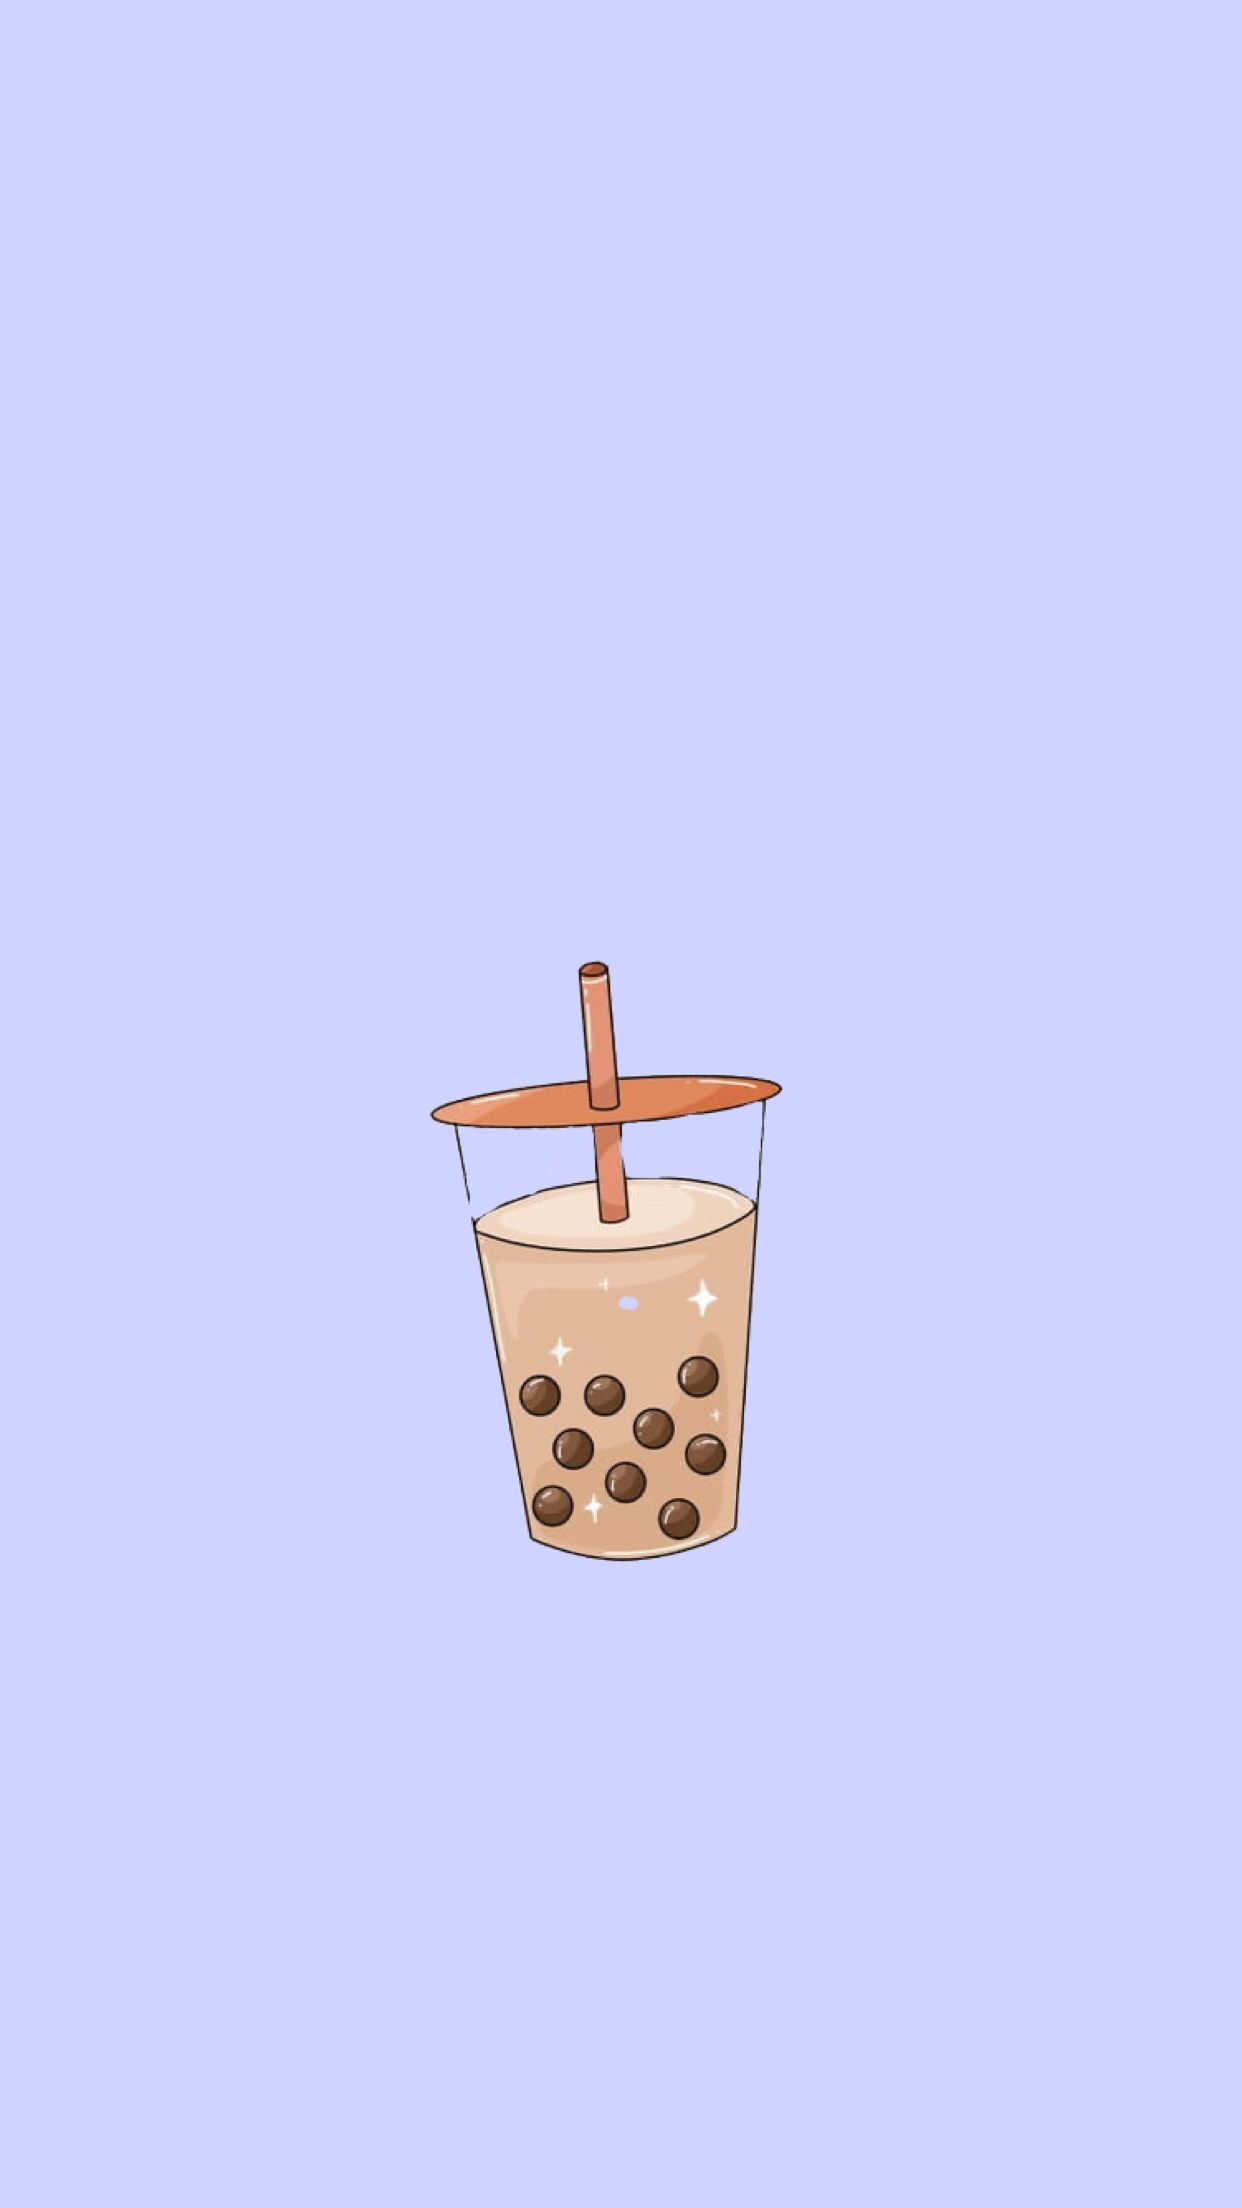 A cup of boba tea with straw - Boba